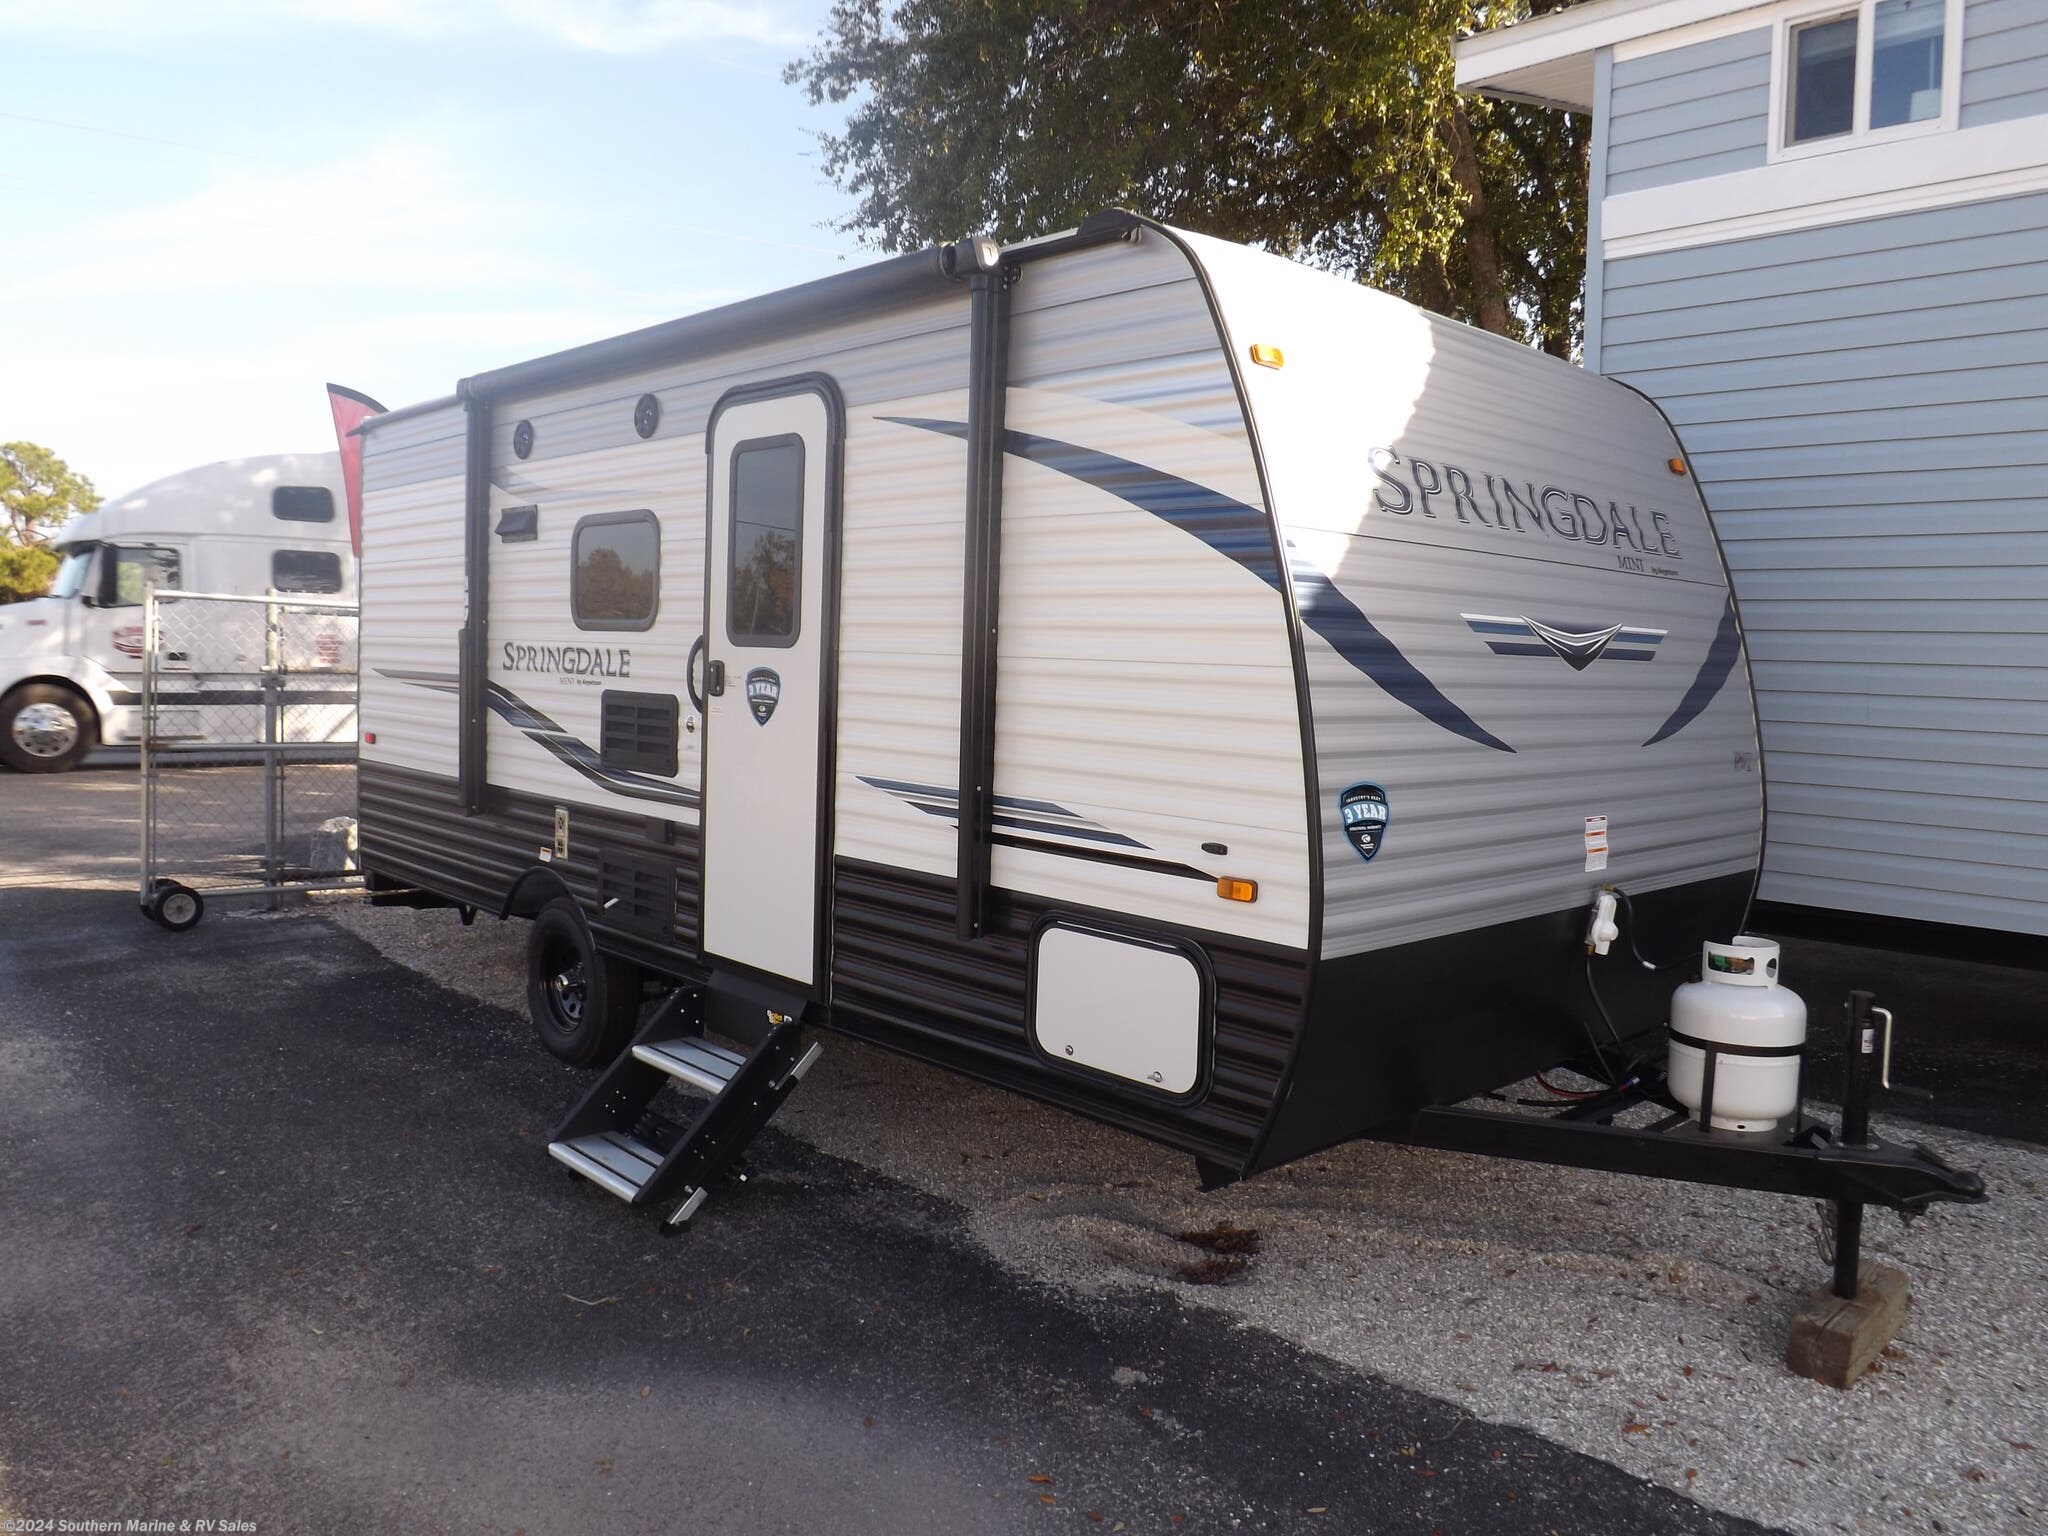 2020 Keystone Springdale 1800BH RV for Sale in Ft. Myers, FL 33905 2020 Keystone Springdale 1800bh Travel Trailer For Sale